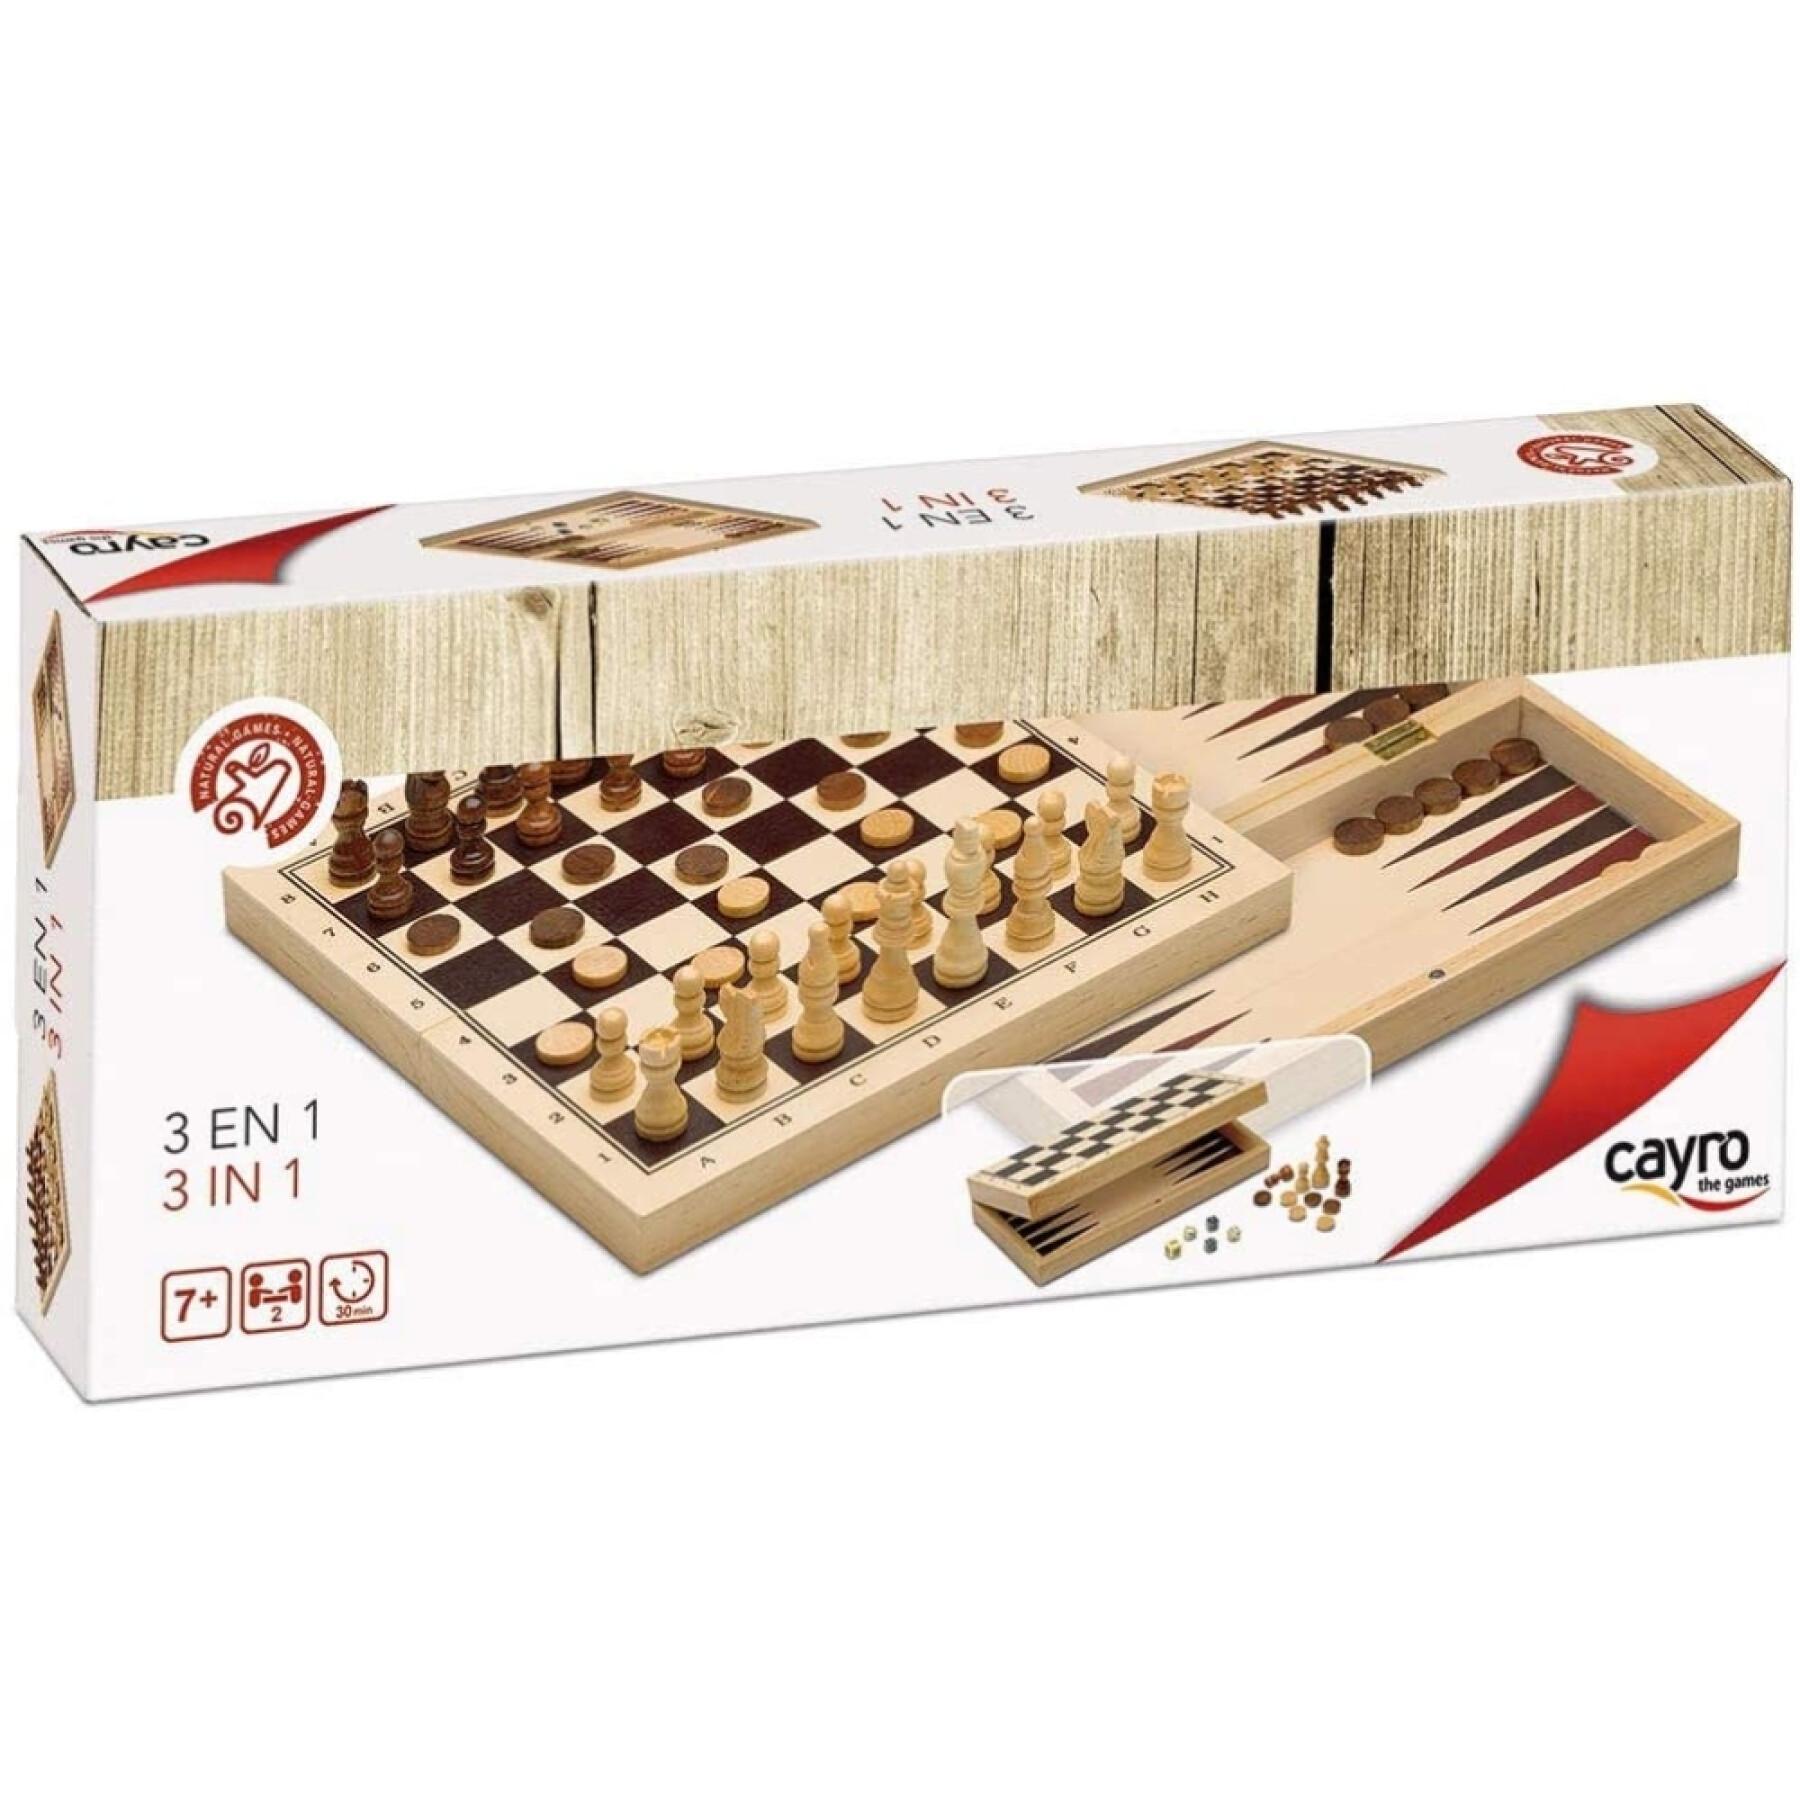 Wooden chess and backgammon sets Cayro